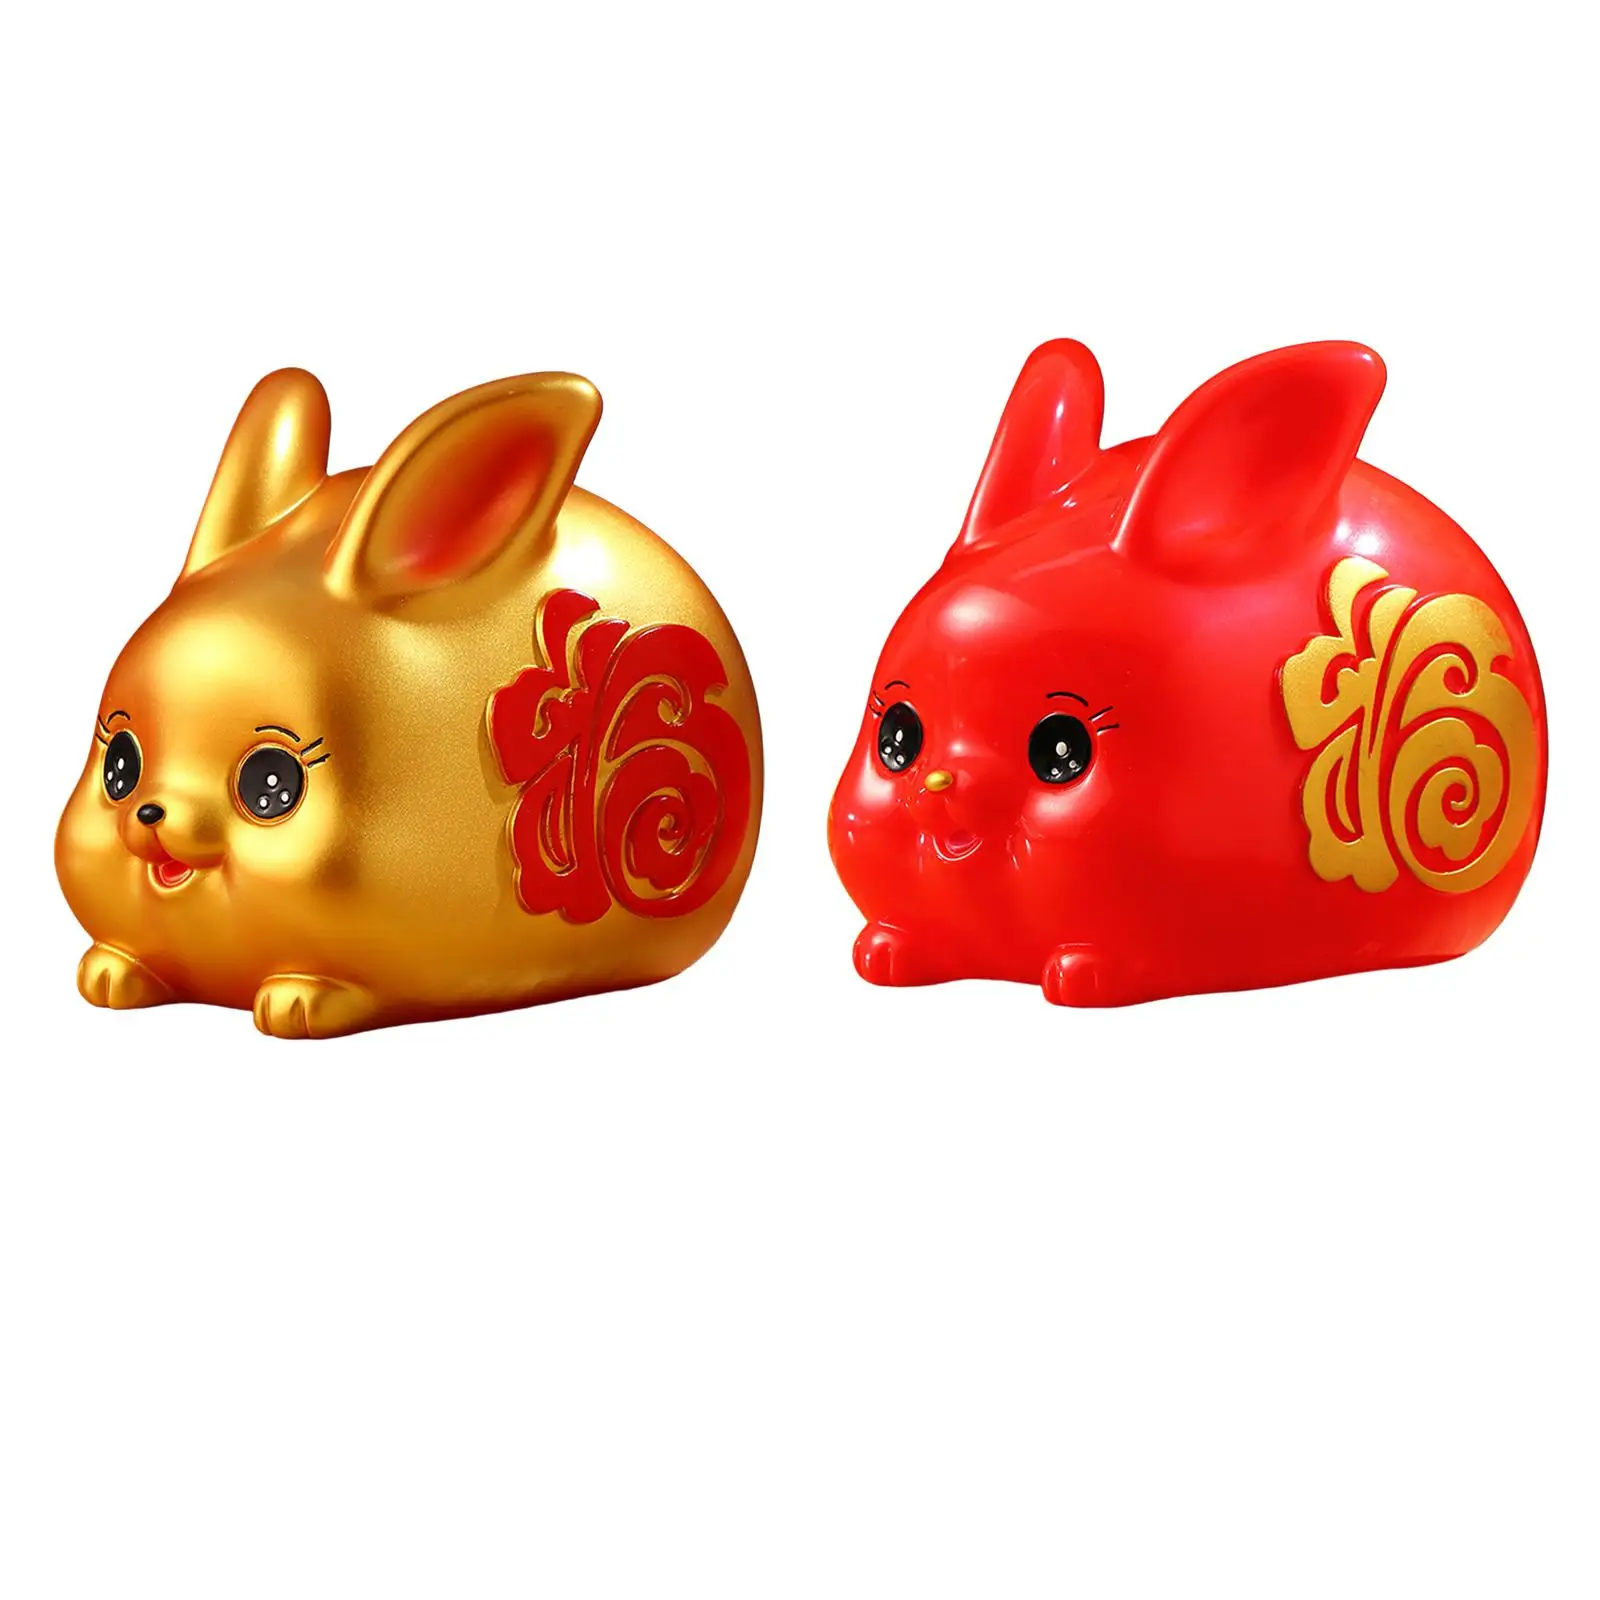 Lucky Rabbit Money Bank Bunny Figurines Change Container Decorative Sculpture Toys Ornaments Display Money Box for Household